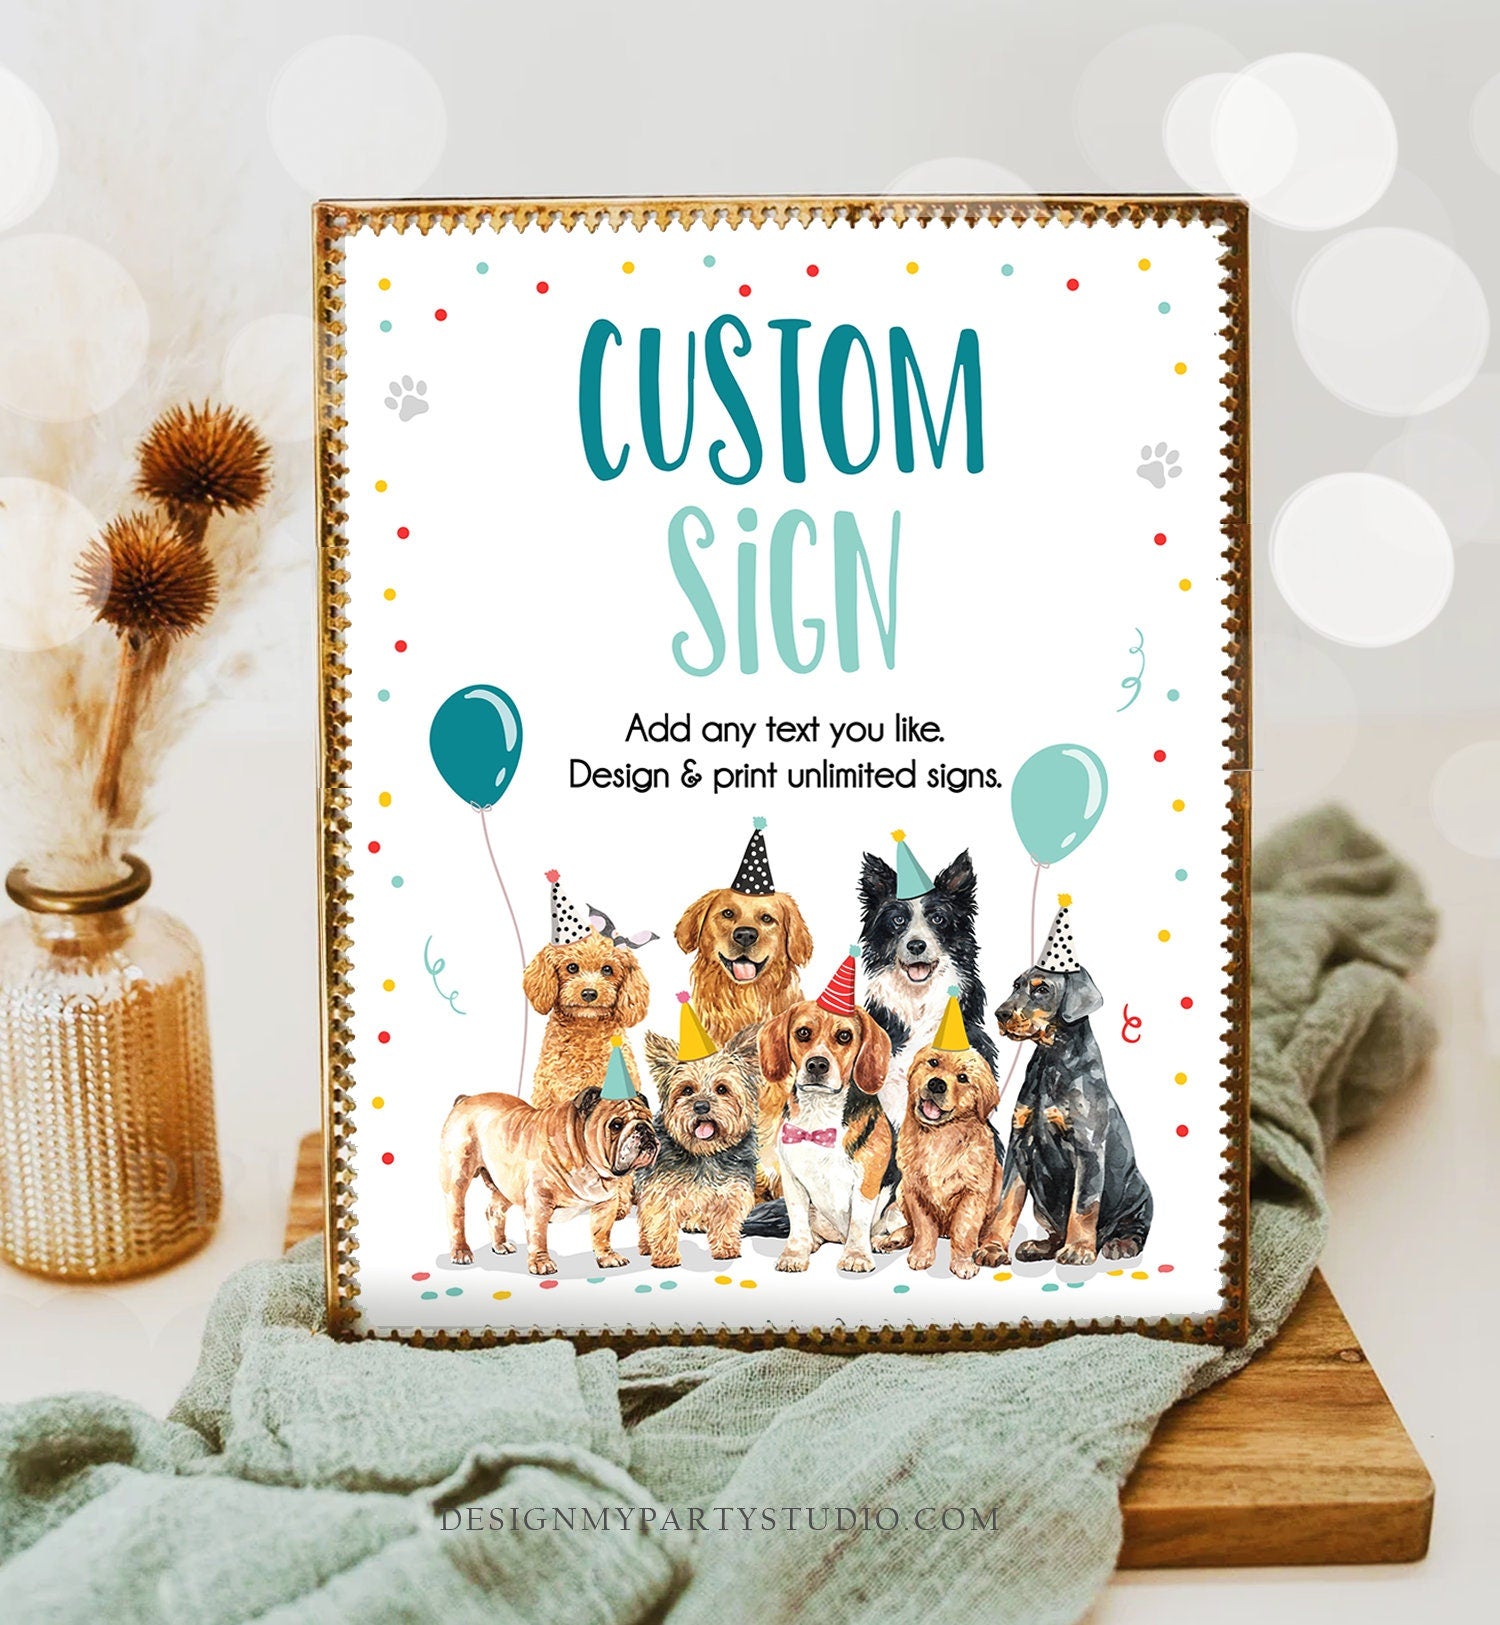 Editable Custom Sign Puppy Birthday Dog Birthday Party Sign Boy Pawty Decor Vet Adopt Table Sign Decoration 8x10 Download Printable 0384